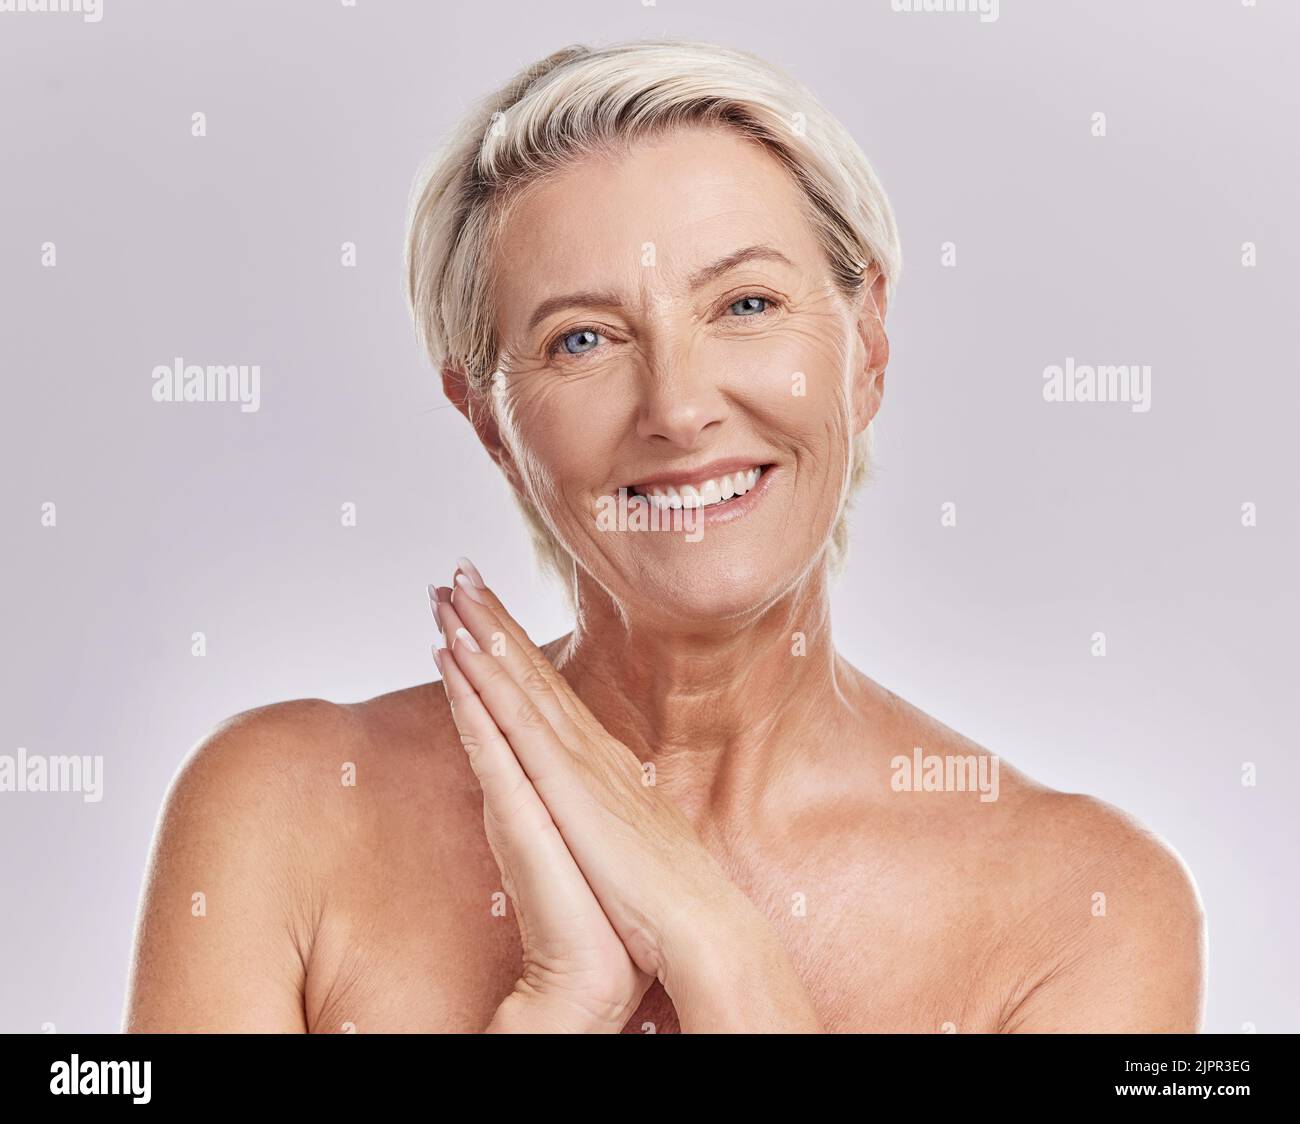 Soft skin, antiaging or wrinkle free senior woman looking happy with her skincare, hygiene and beauty nighttime or bedtime routine. Beautiful Stock Photo